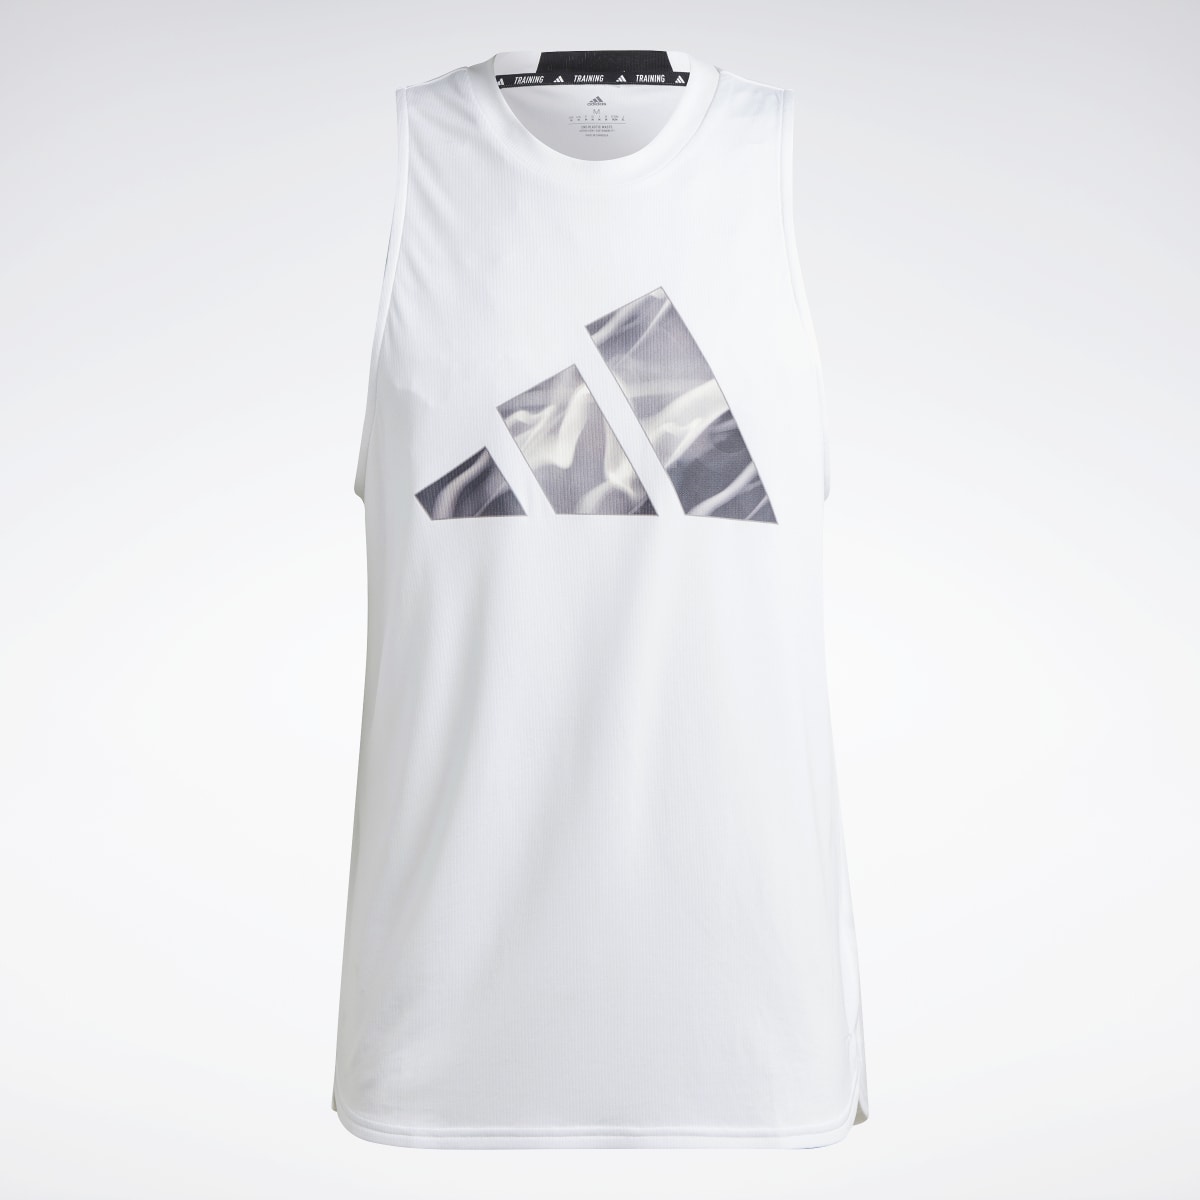 Adidas Designed for Movement HIIT Training Tank Top. 5